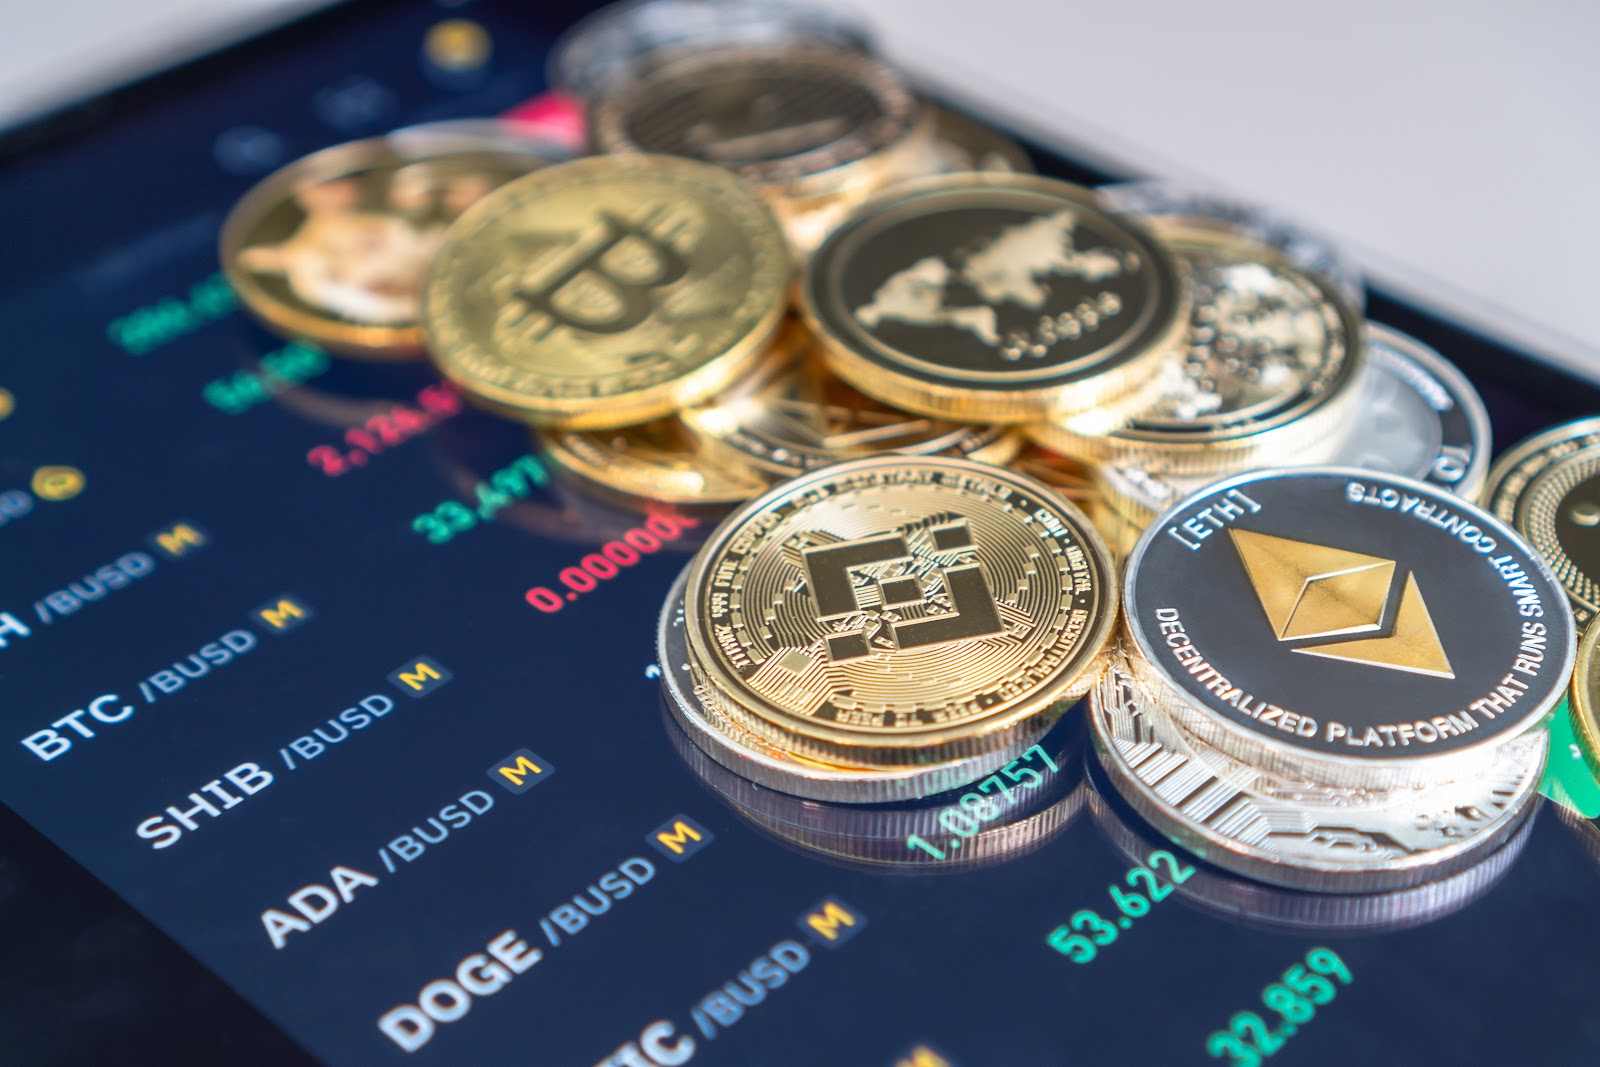 Compensation in the crypto industry falls short in latest report